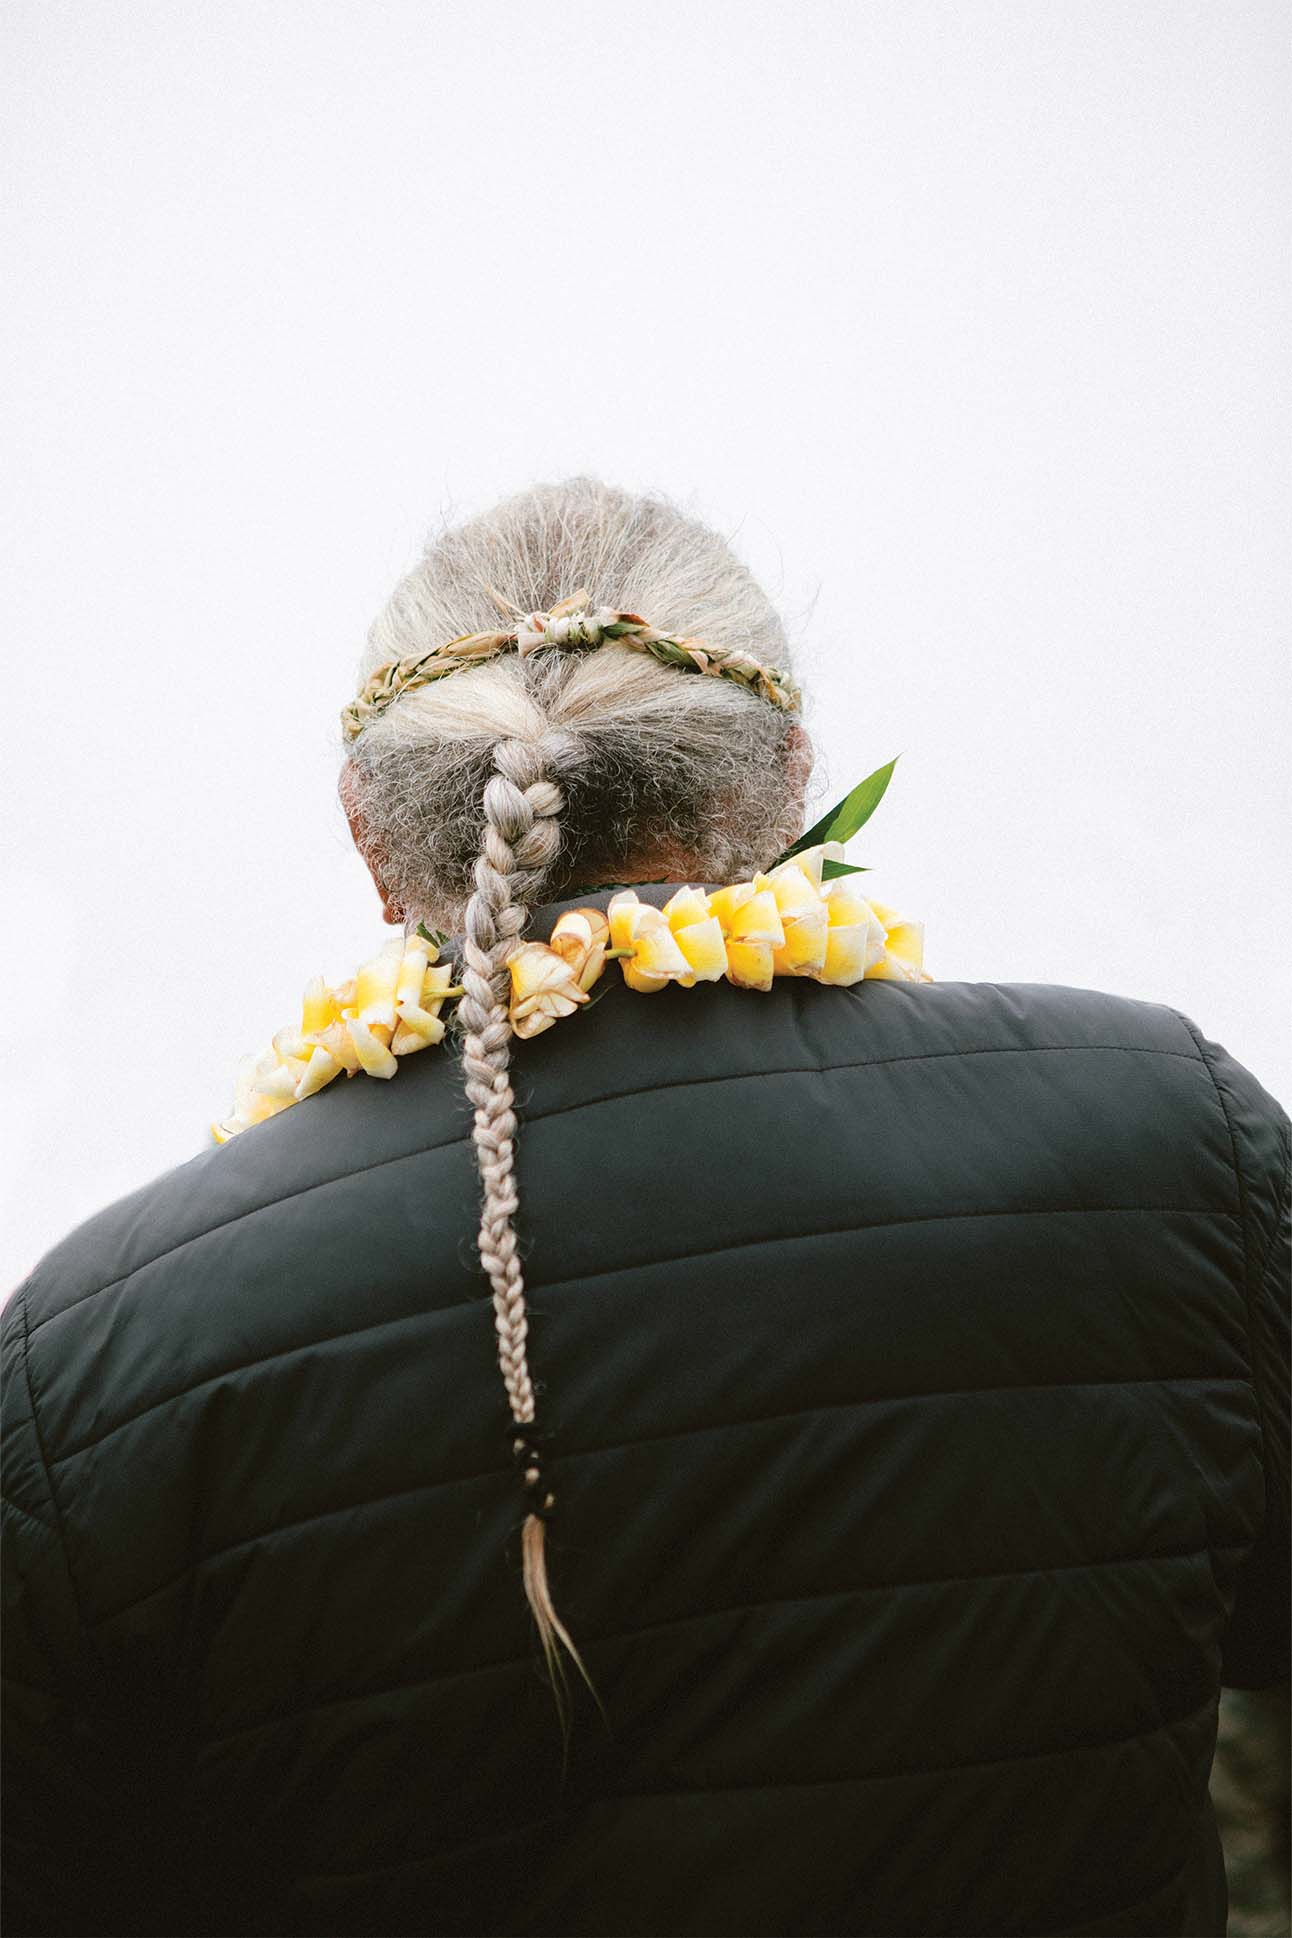 Back view of a person wearing a black jacket with a gray braided hair decorated with a flower crown and a yellow flower lei.